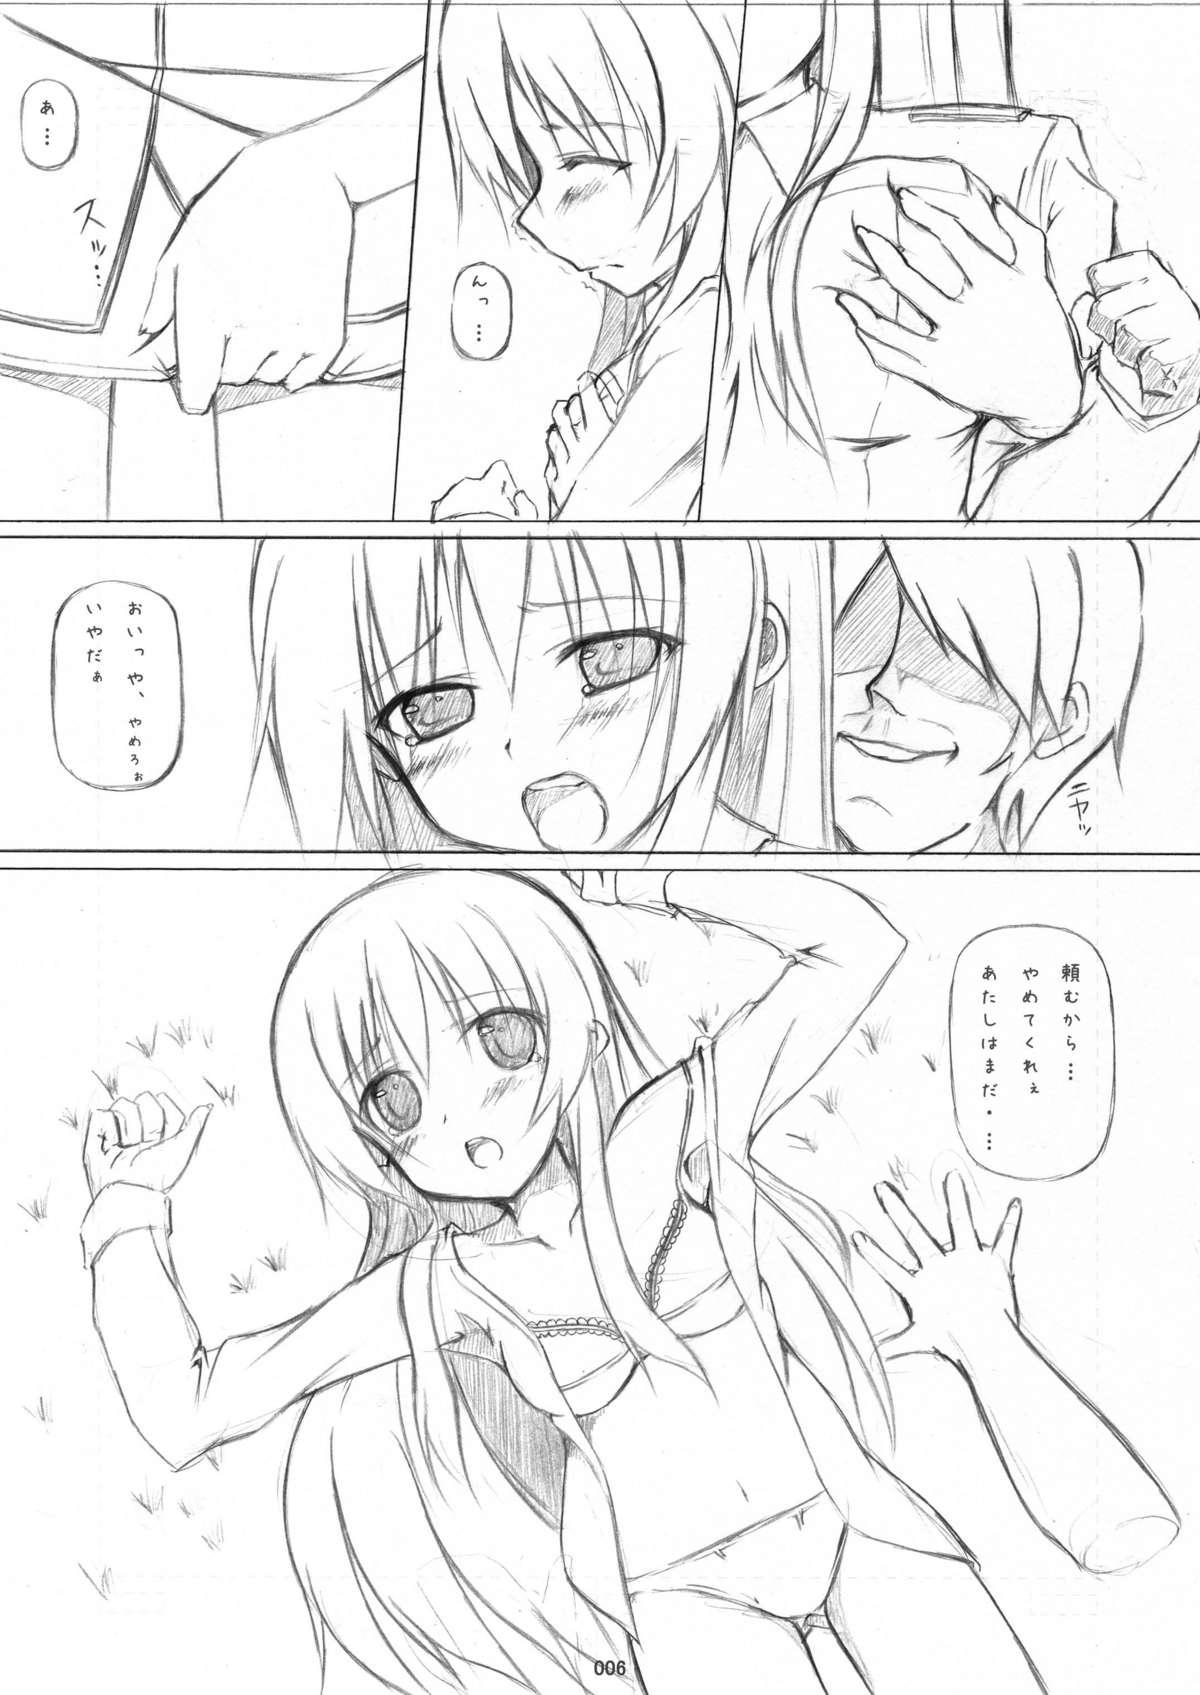 Abuse STRIKE☆ZONE 2 - Strike witches Dirty - Page 5